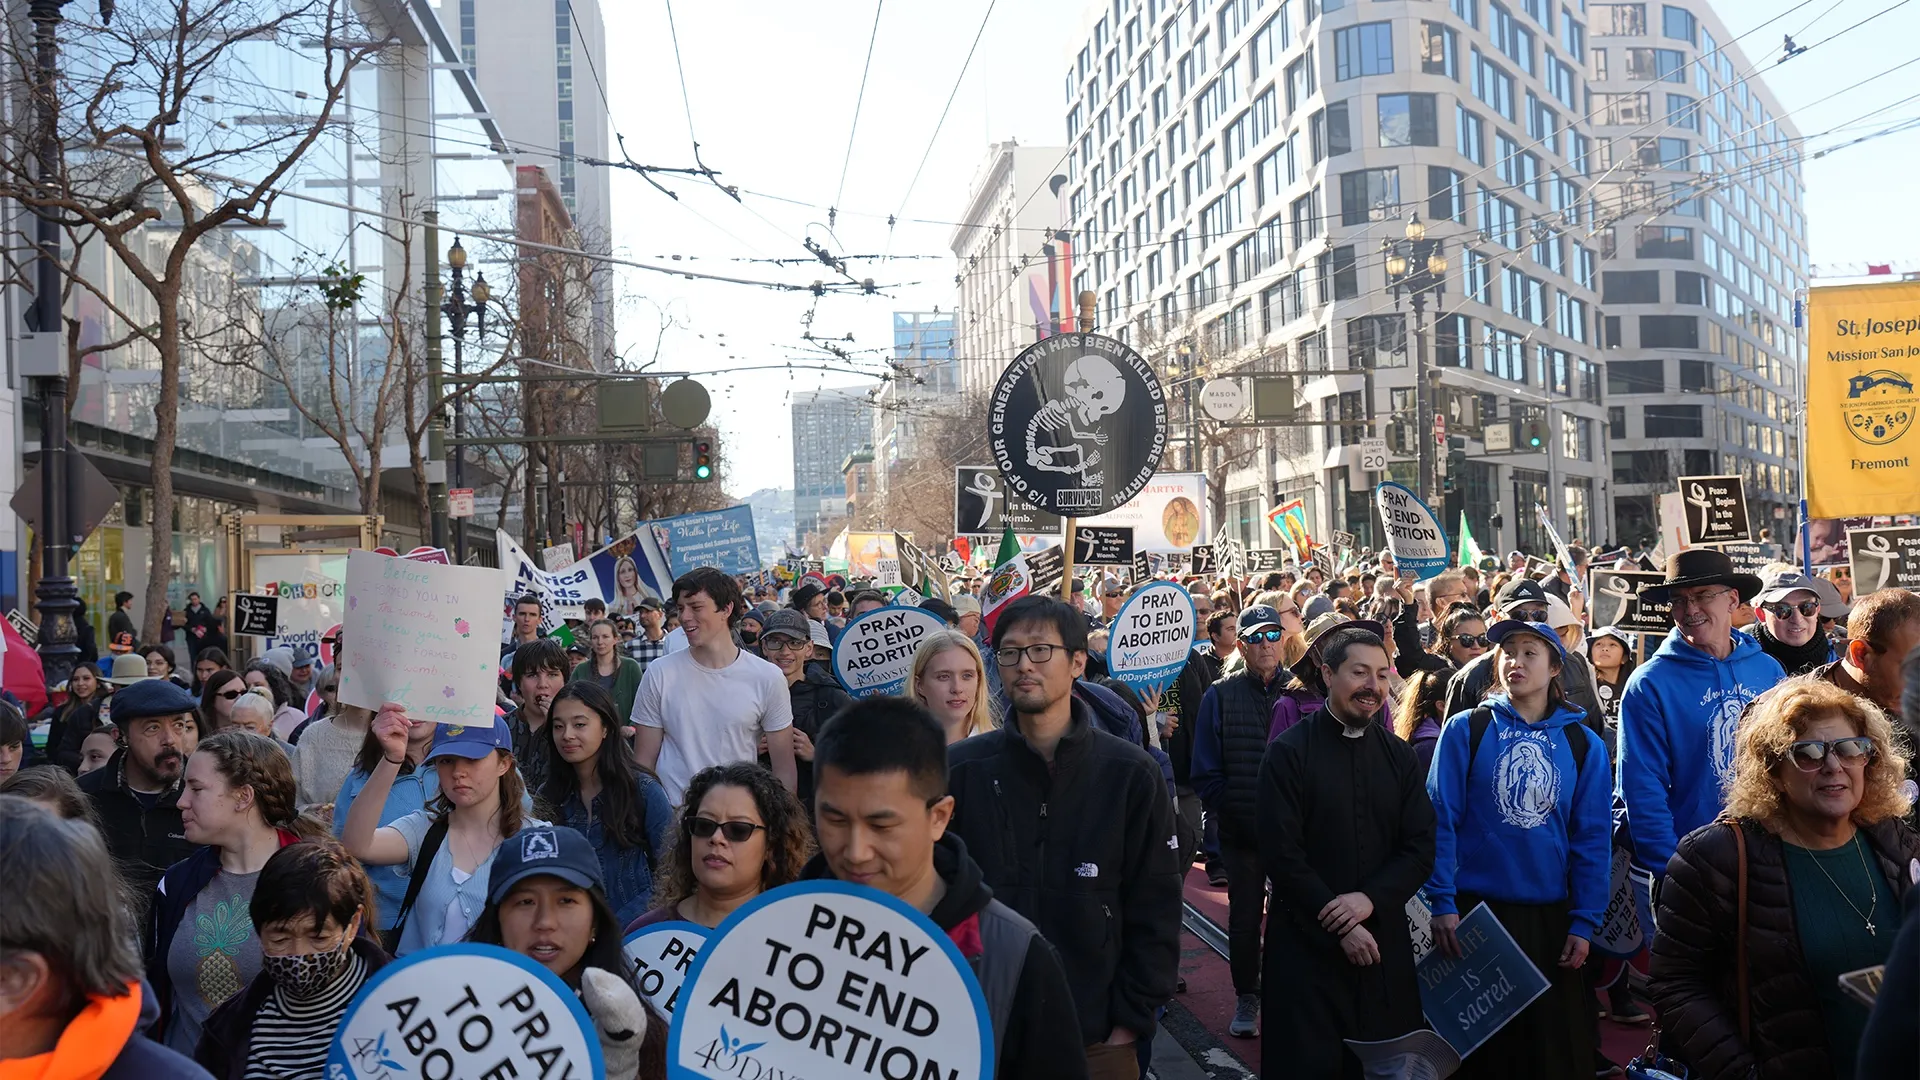 An estimated 10,000 people turned out for the San Francisco Walk for Life on Jan. 21, 2023, the second-largest pro-life demonstration in the U.S. after the national March for Life in Washington, D.C., which marked its 50th anniversary a day earlier. Credit: Francisco Valdez